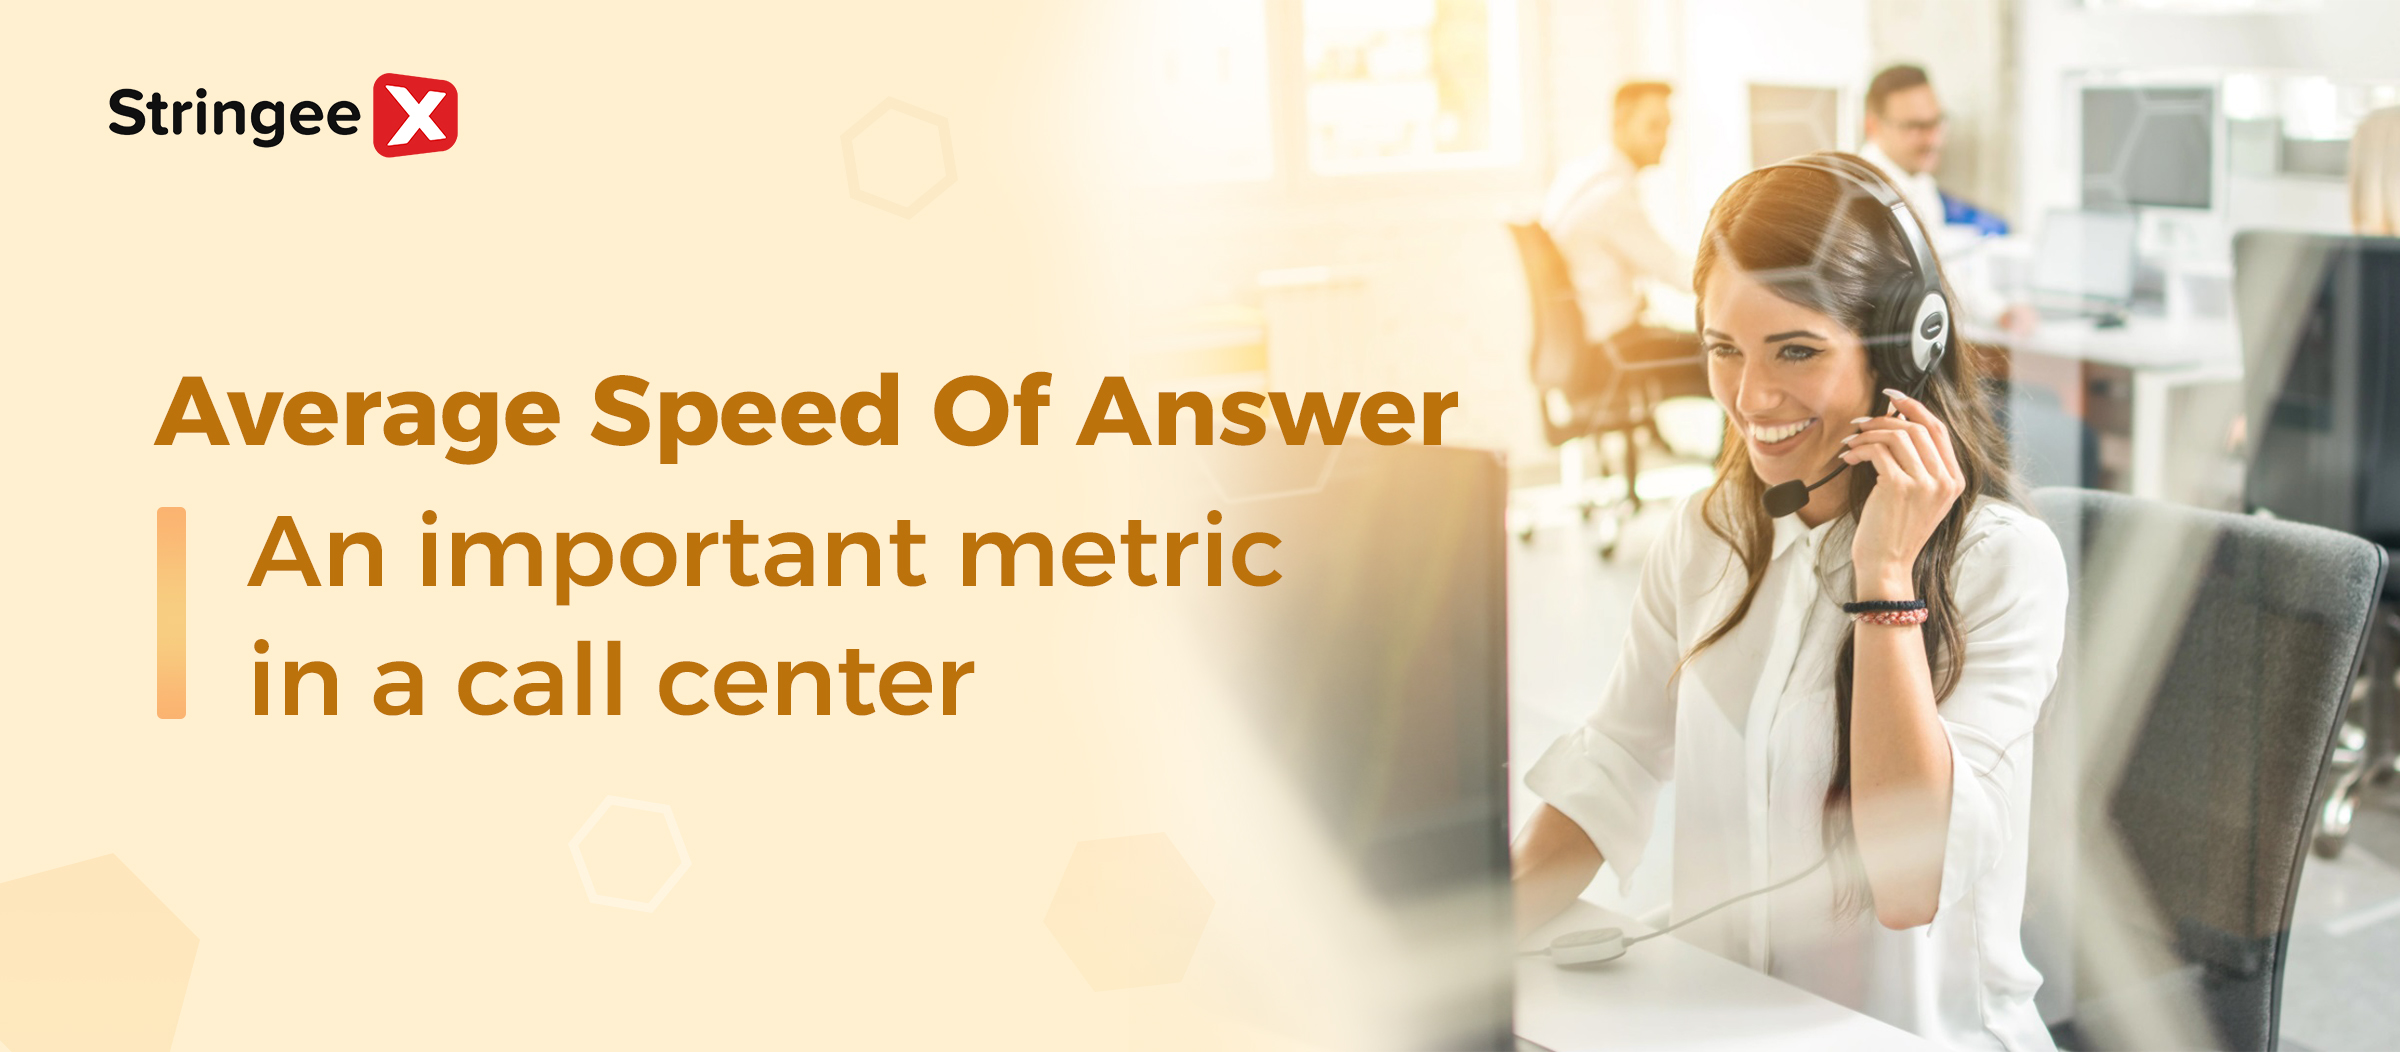 Average Speed Of Answer - An Important Metric In A Call Center